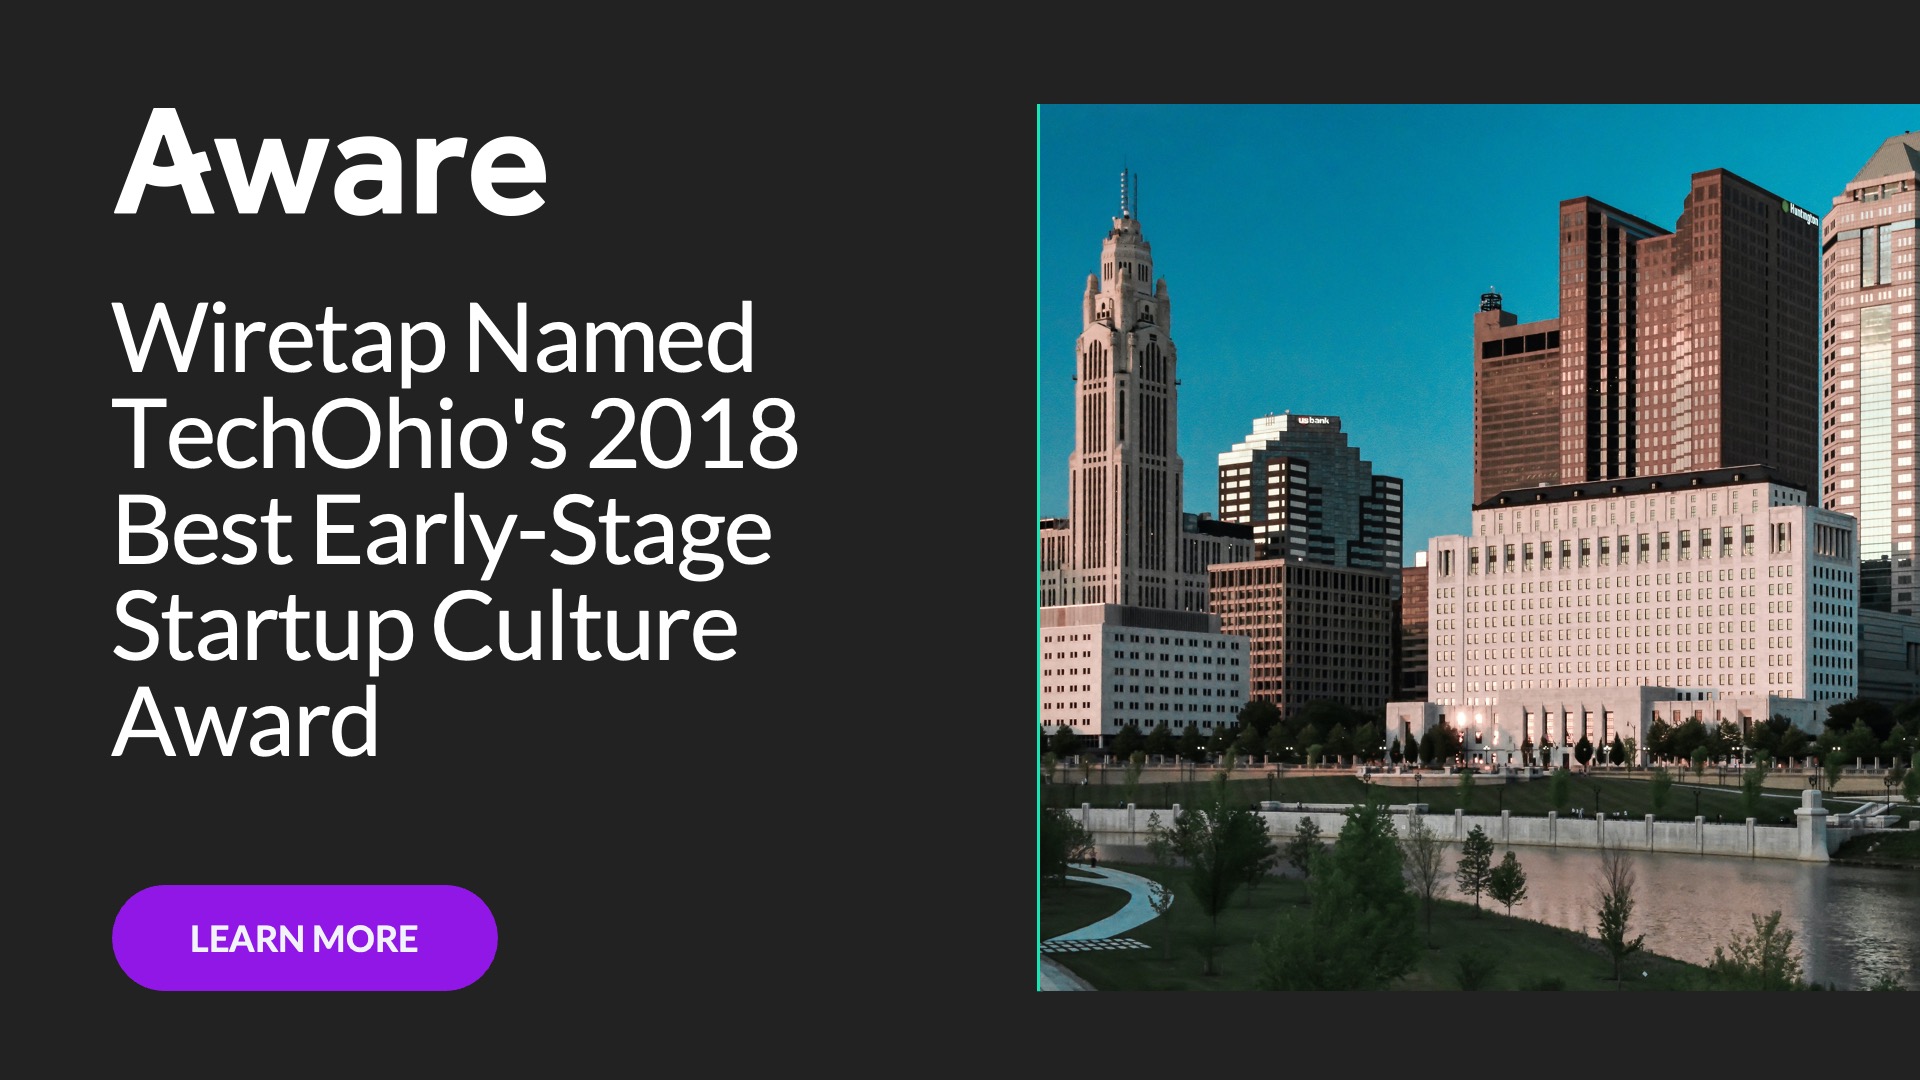 Wiretap Named TechOhio's 2018 Best Early-Stage Startup Culture Award